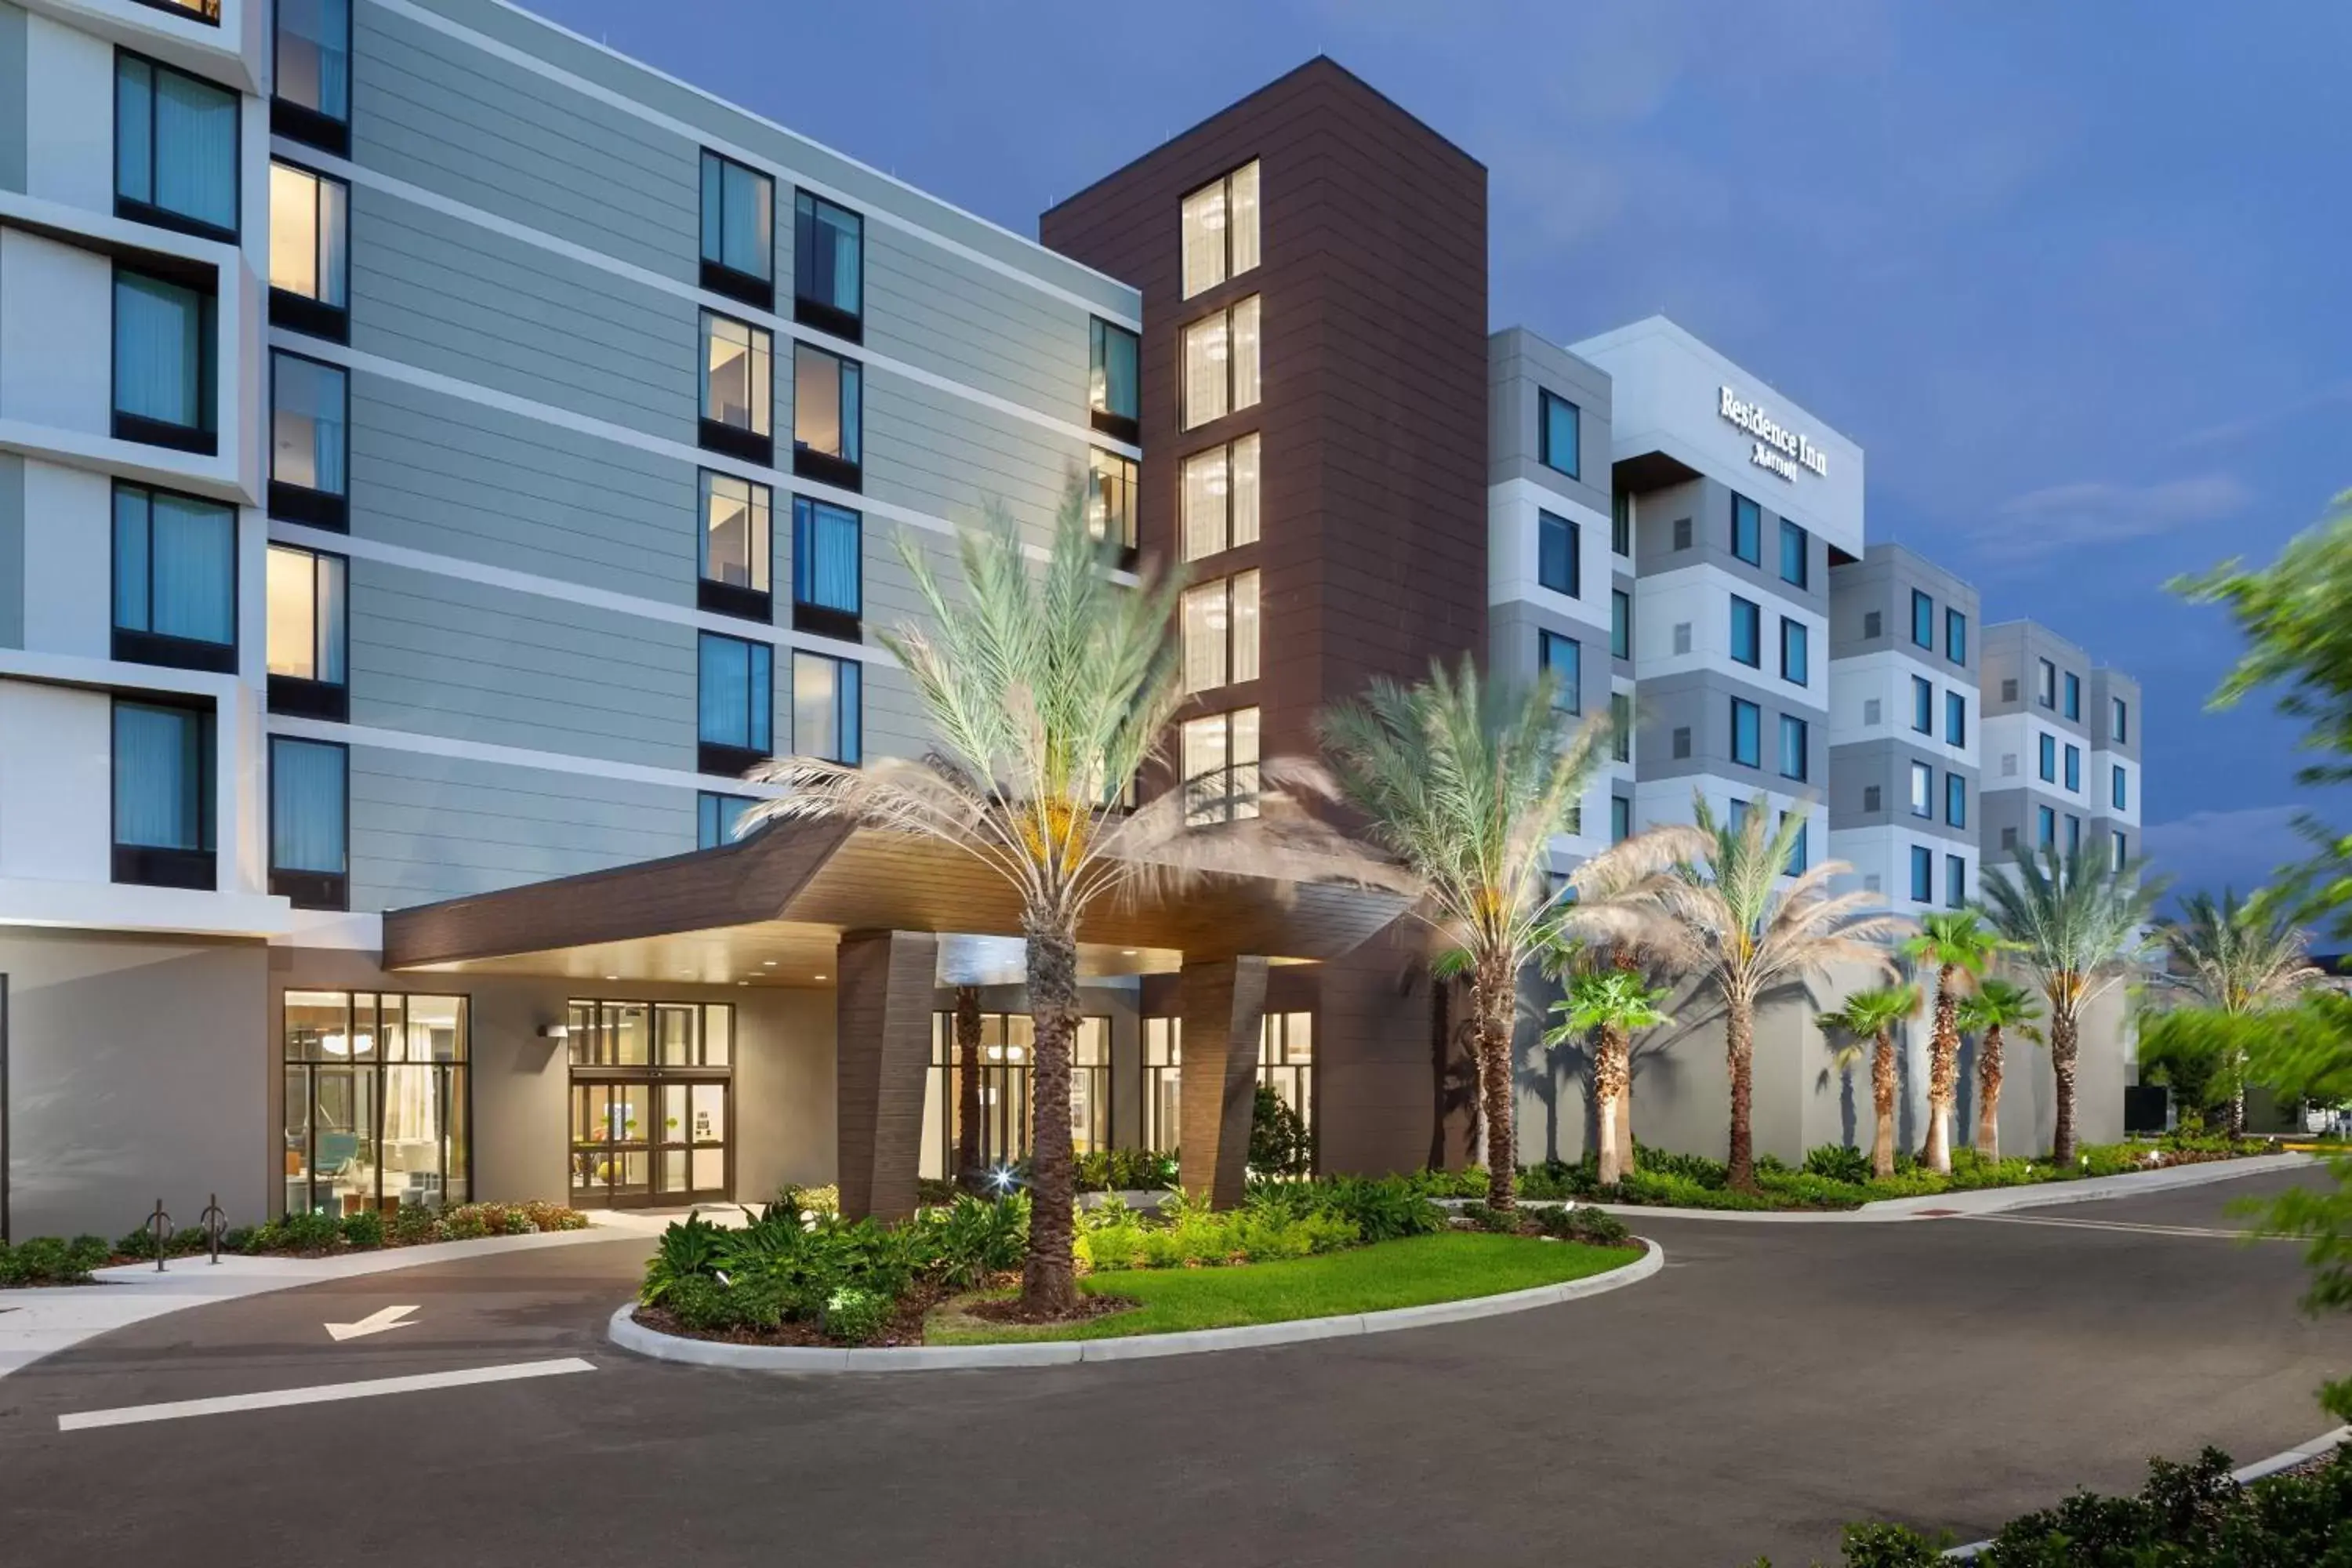 Property Building in Residence Inn by Marriott Orlando at Millenia